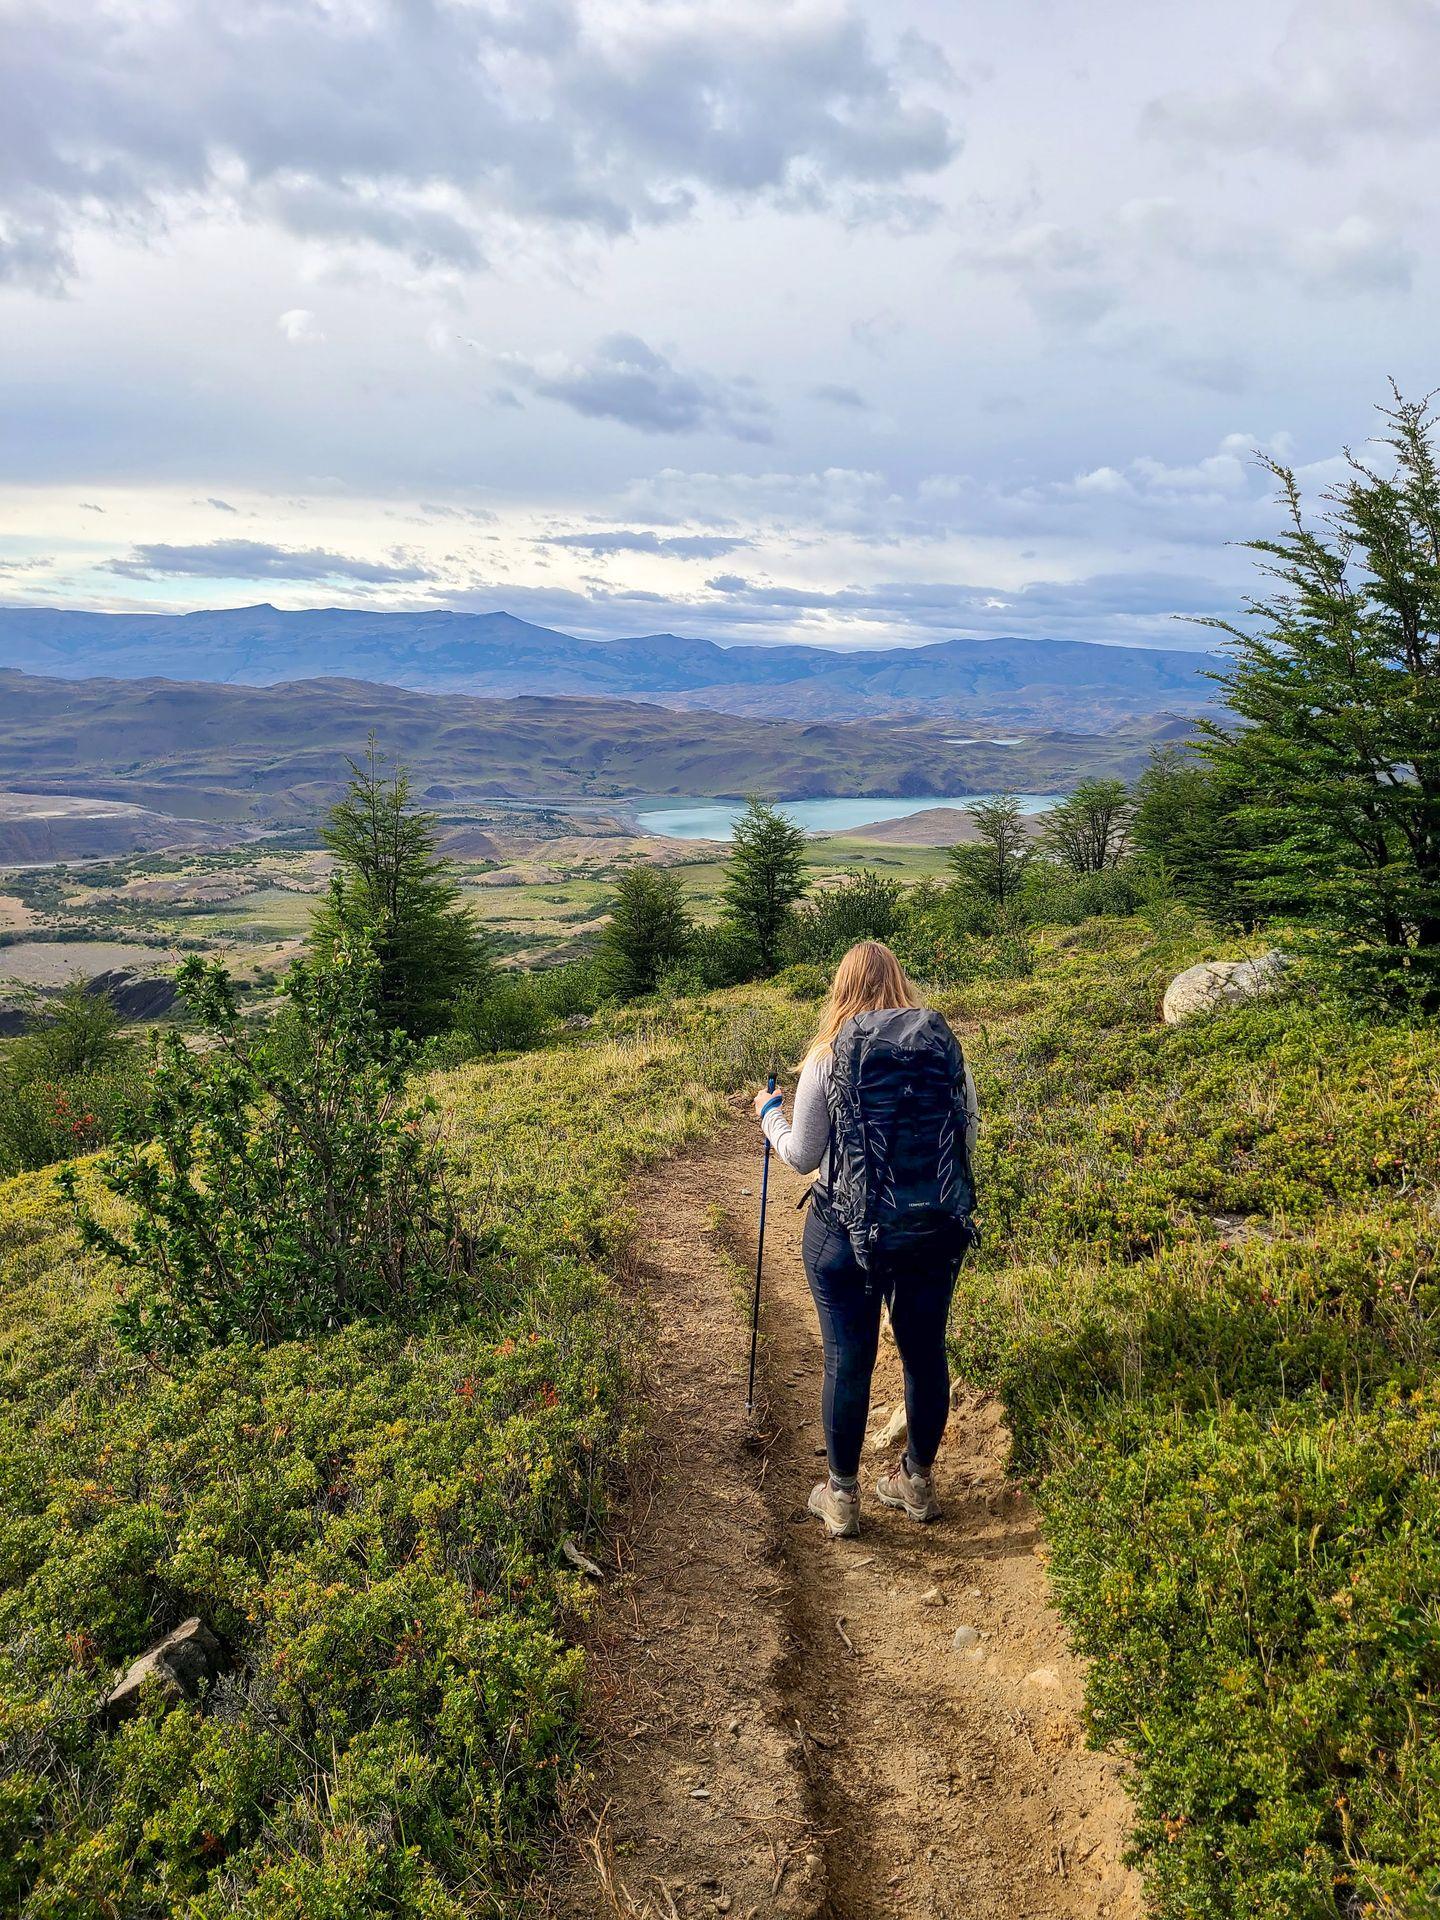 Lydia standing on a trail in the W Trek wearing a black backpack. The trail is surrounded by greenery and there is a lake in the distance.